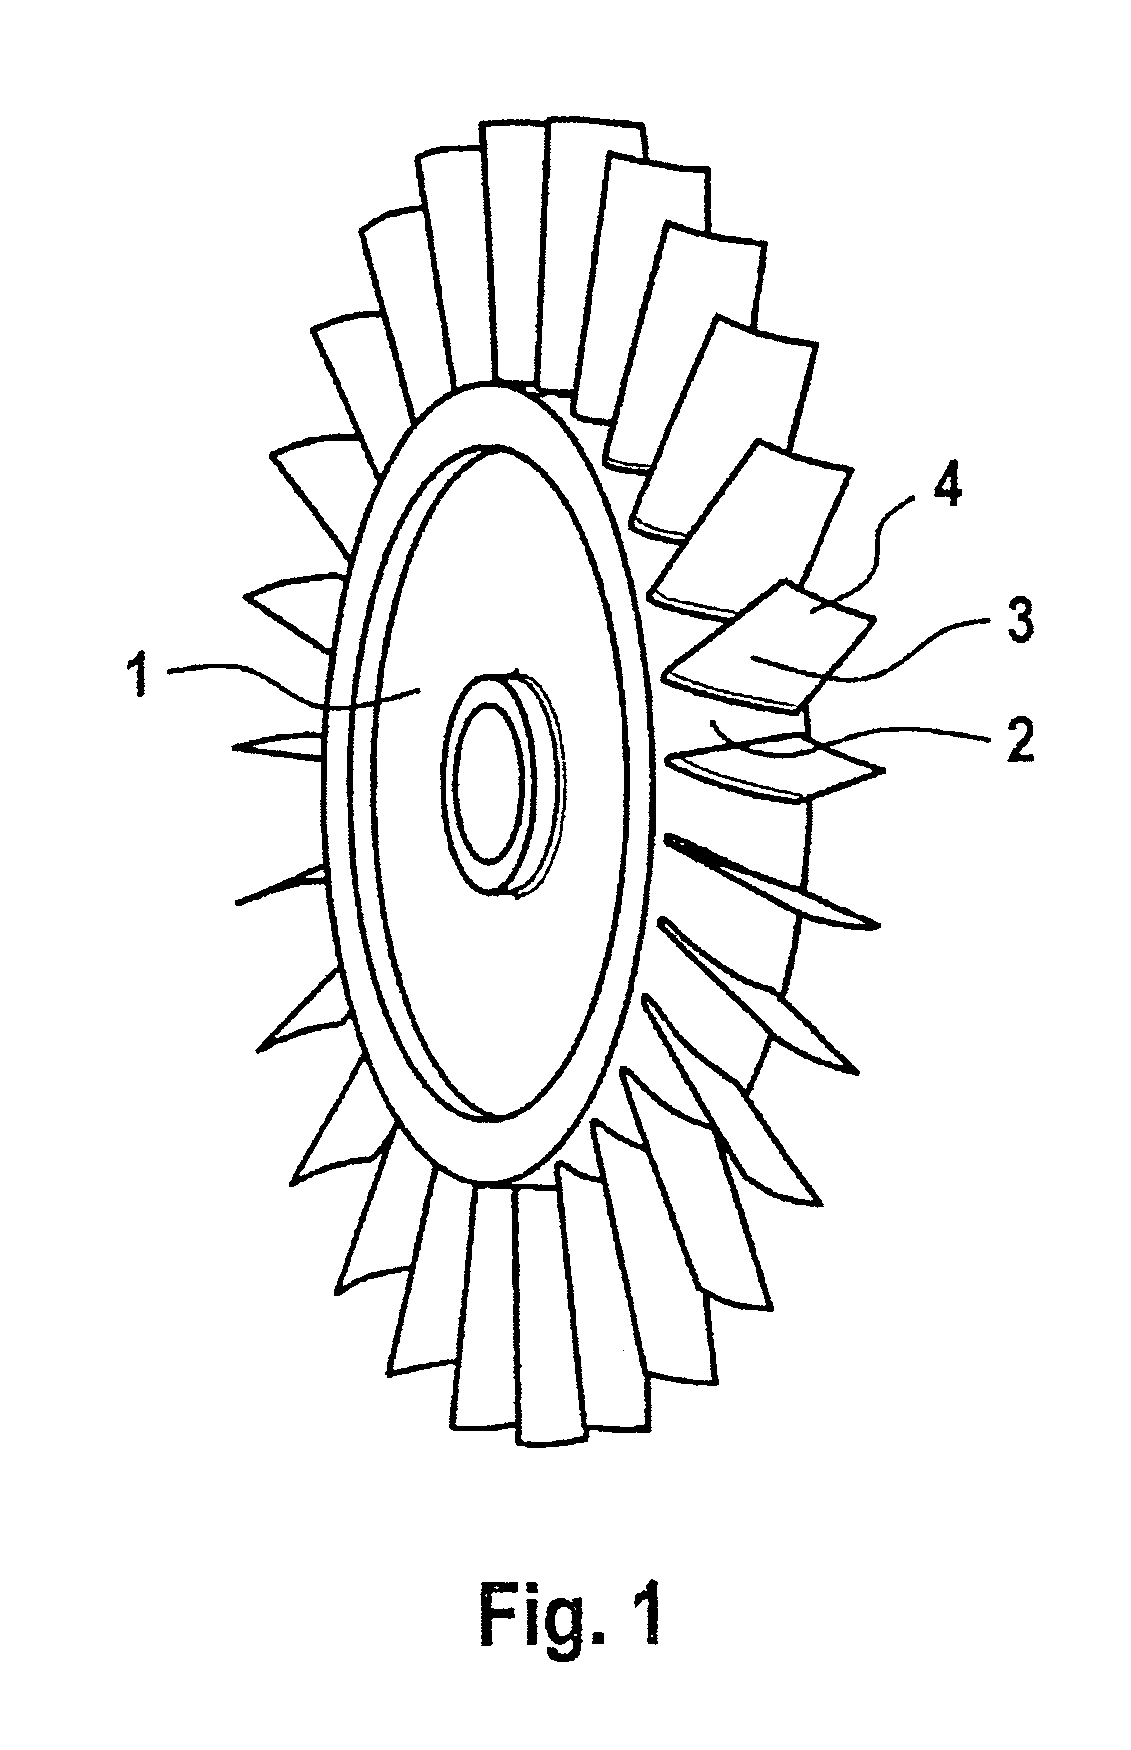 Method and device for locally removing coating from parts